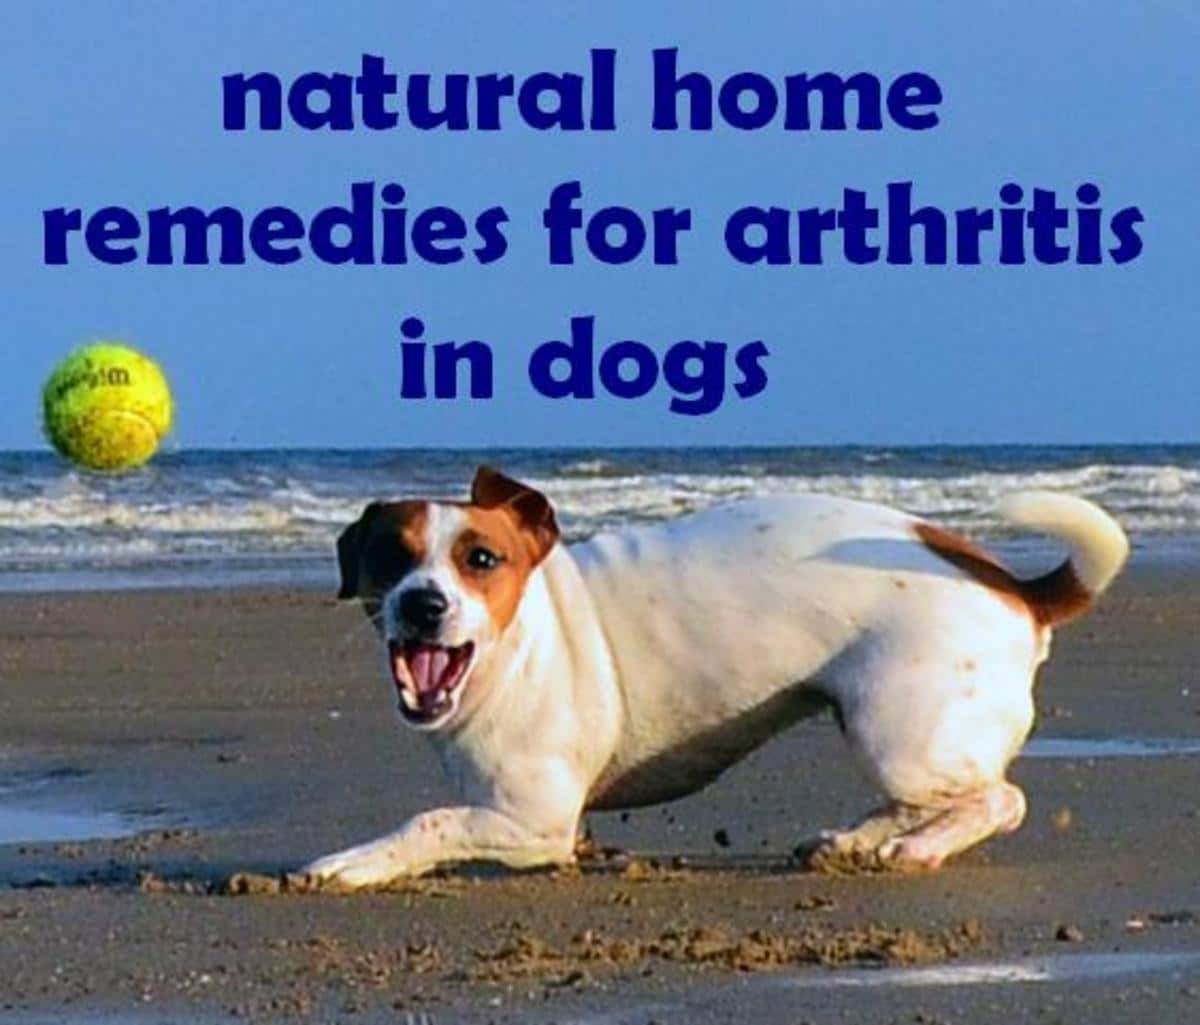 Arthritis in Dogs: Treatment, Natural Home Remedies, and Symptoms ...